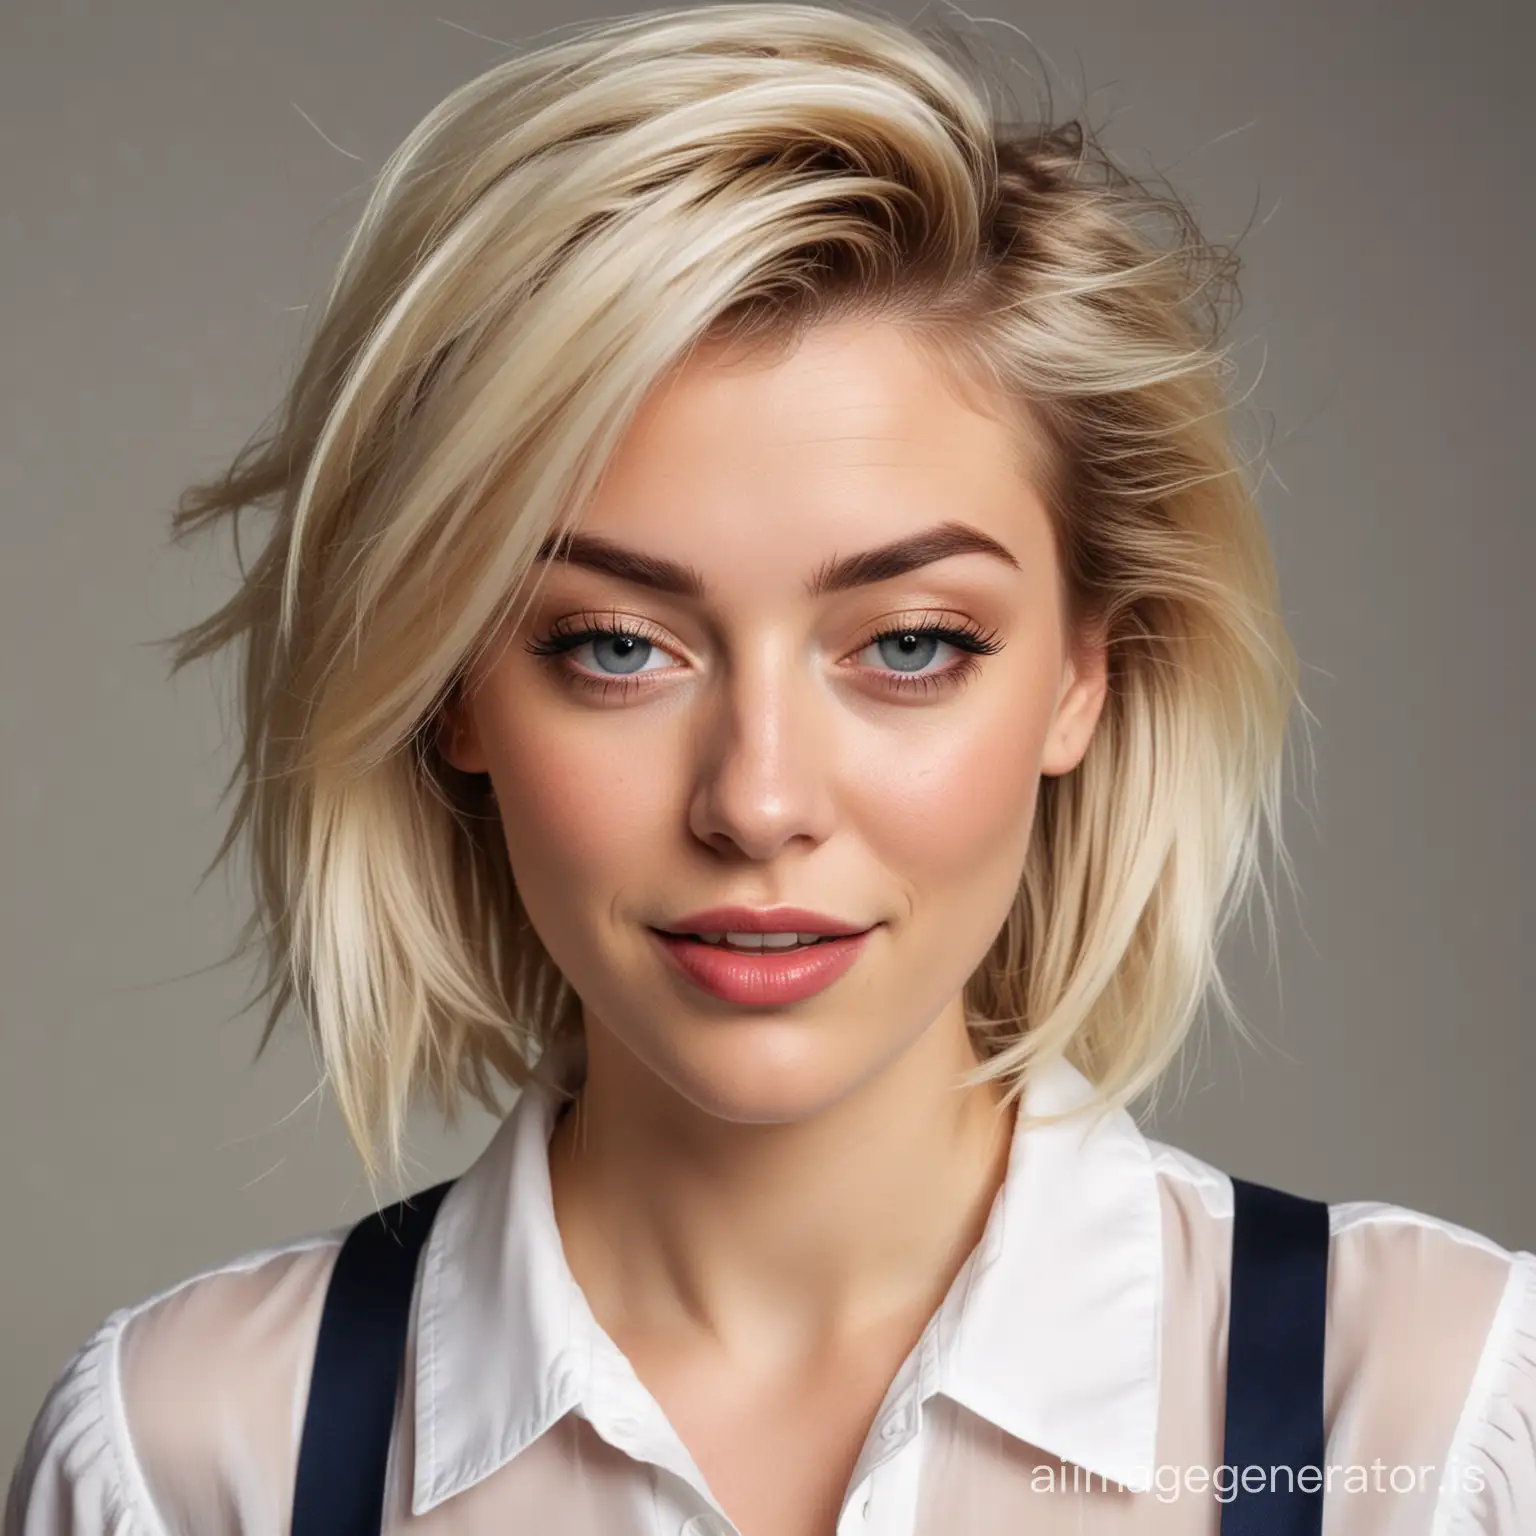 An attractive light-blonde woman with hair in a loose quiff with long fringe. She has thick eyebrows and freckles, wearing a sleeveless white blouse, midnight blue suspenders, and skirt. She winks toward the viewer with one eye.